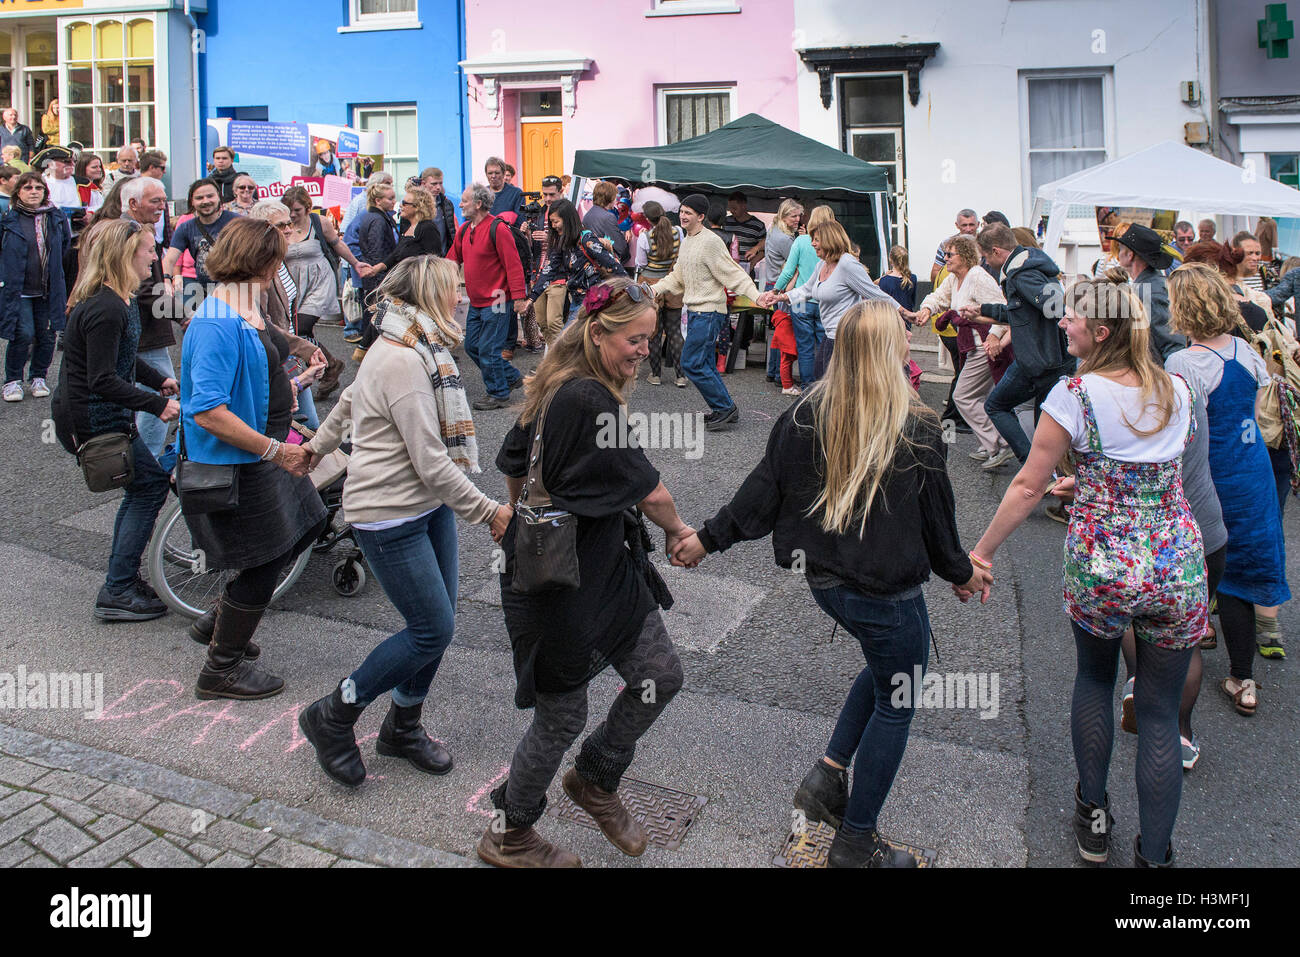 Members of the public dancing in the street at the Penryn Festival in Cornwall Stock Photo